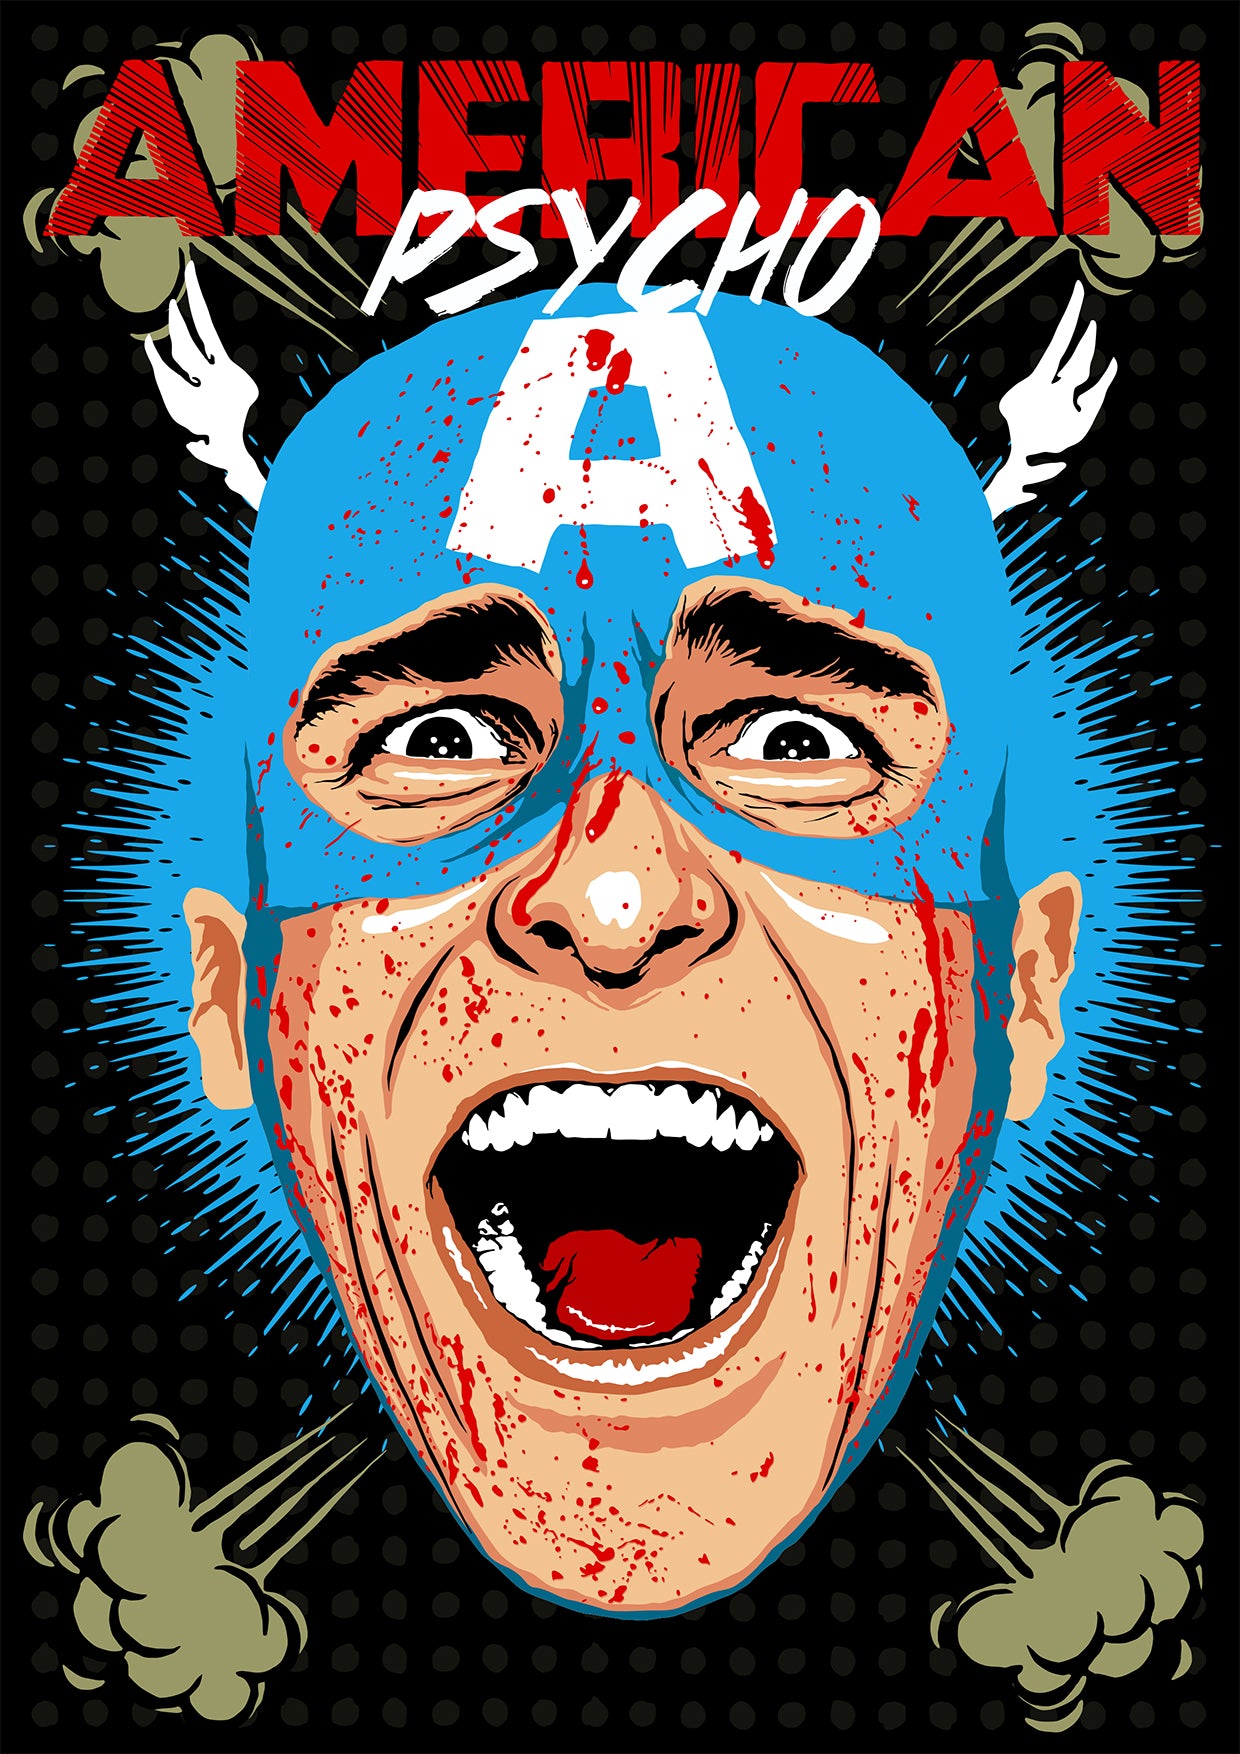 "American Psycho - Captain America" by Butcher Billy